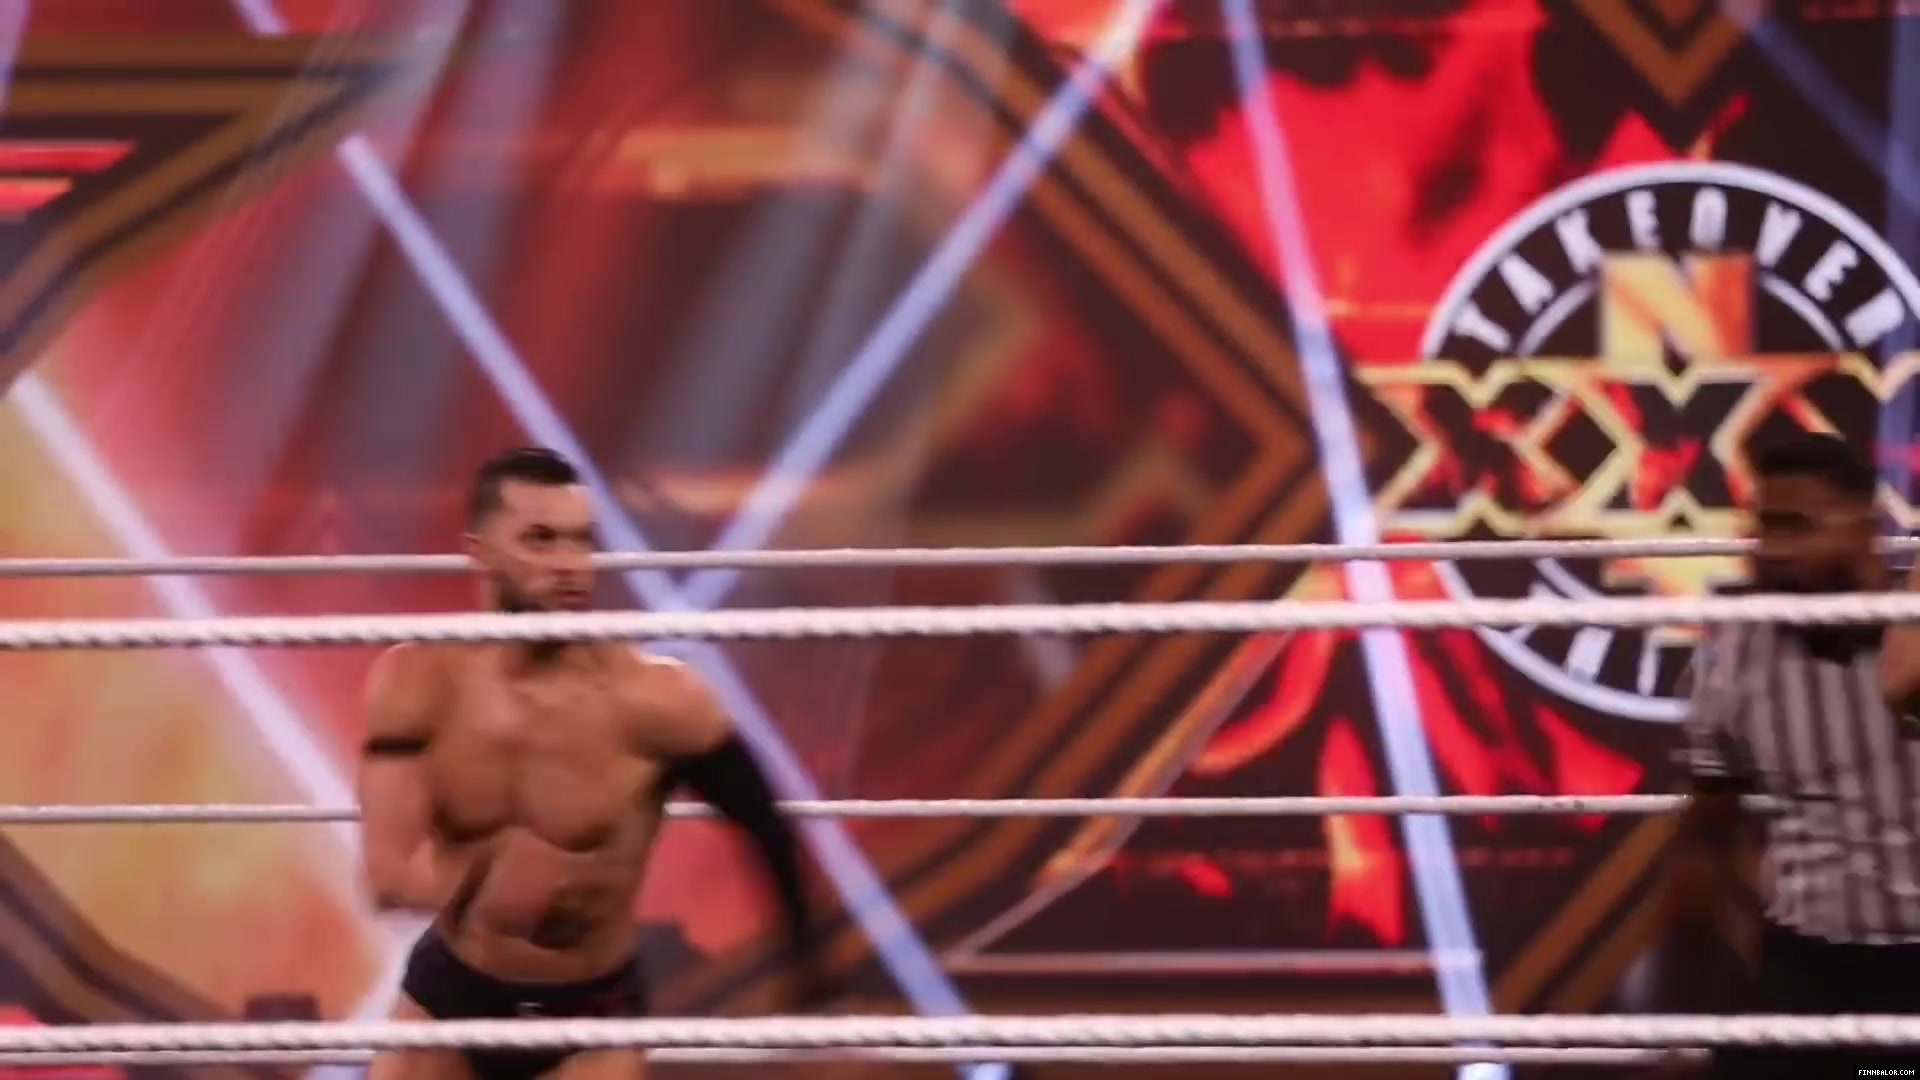 Finn_Balor___The_Rising_of_the_Prince_in_NXT_531.jpg